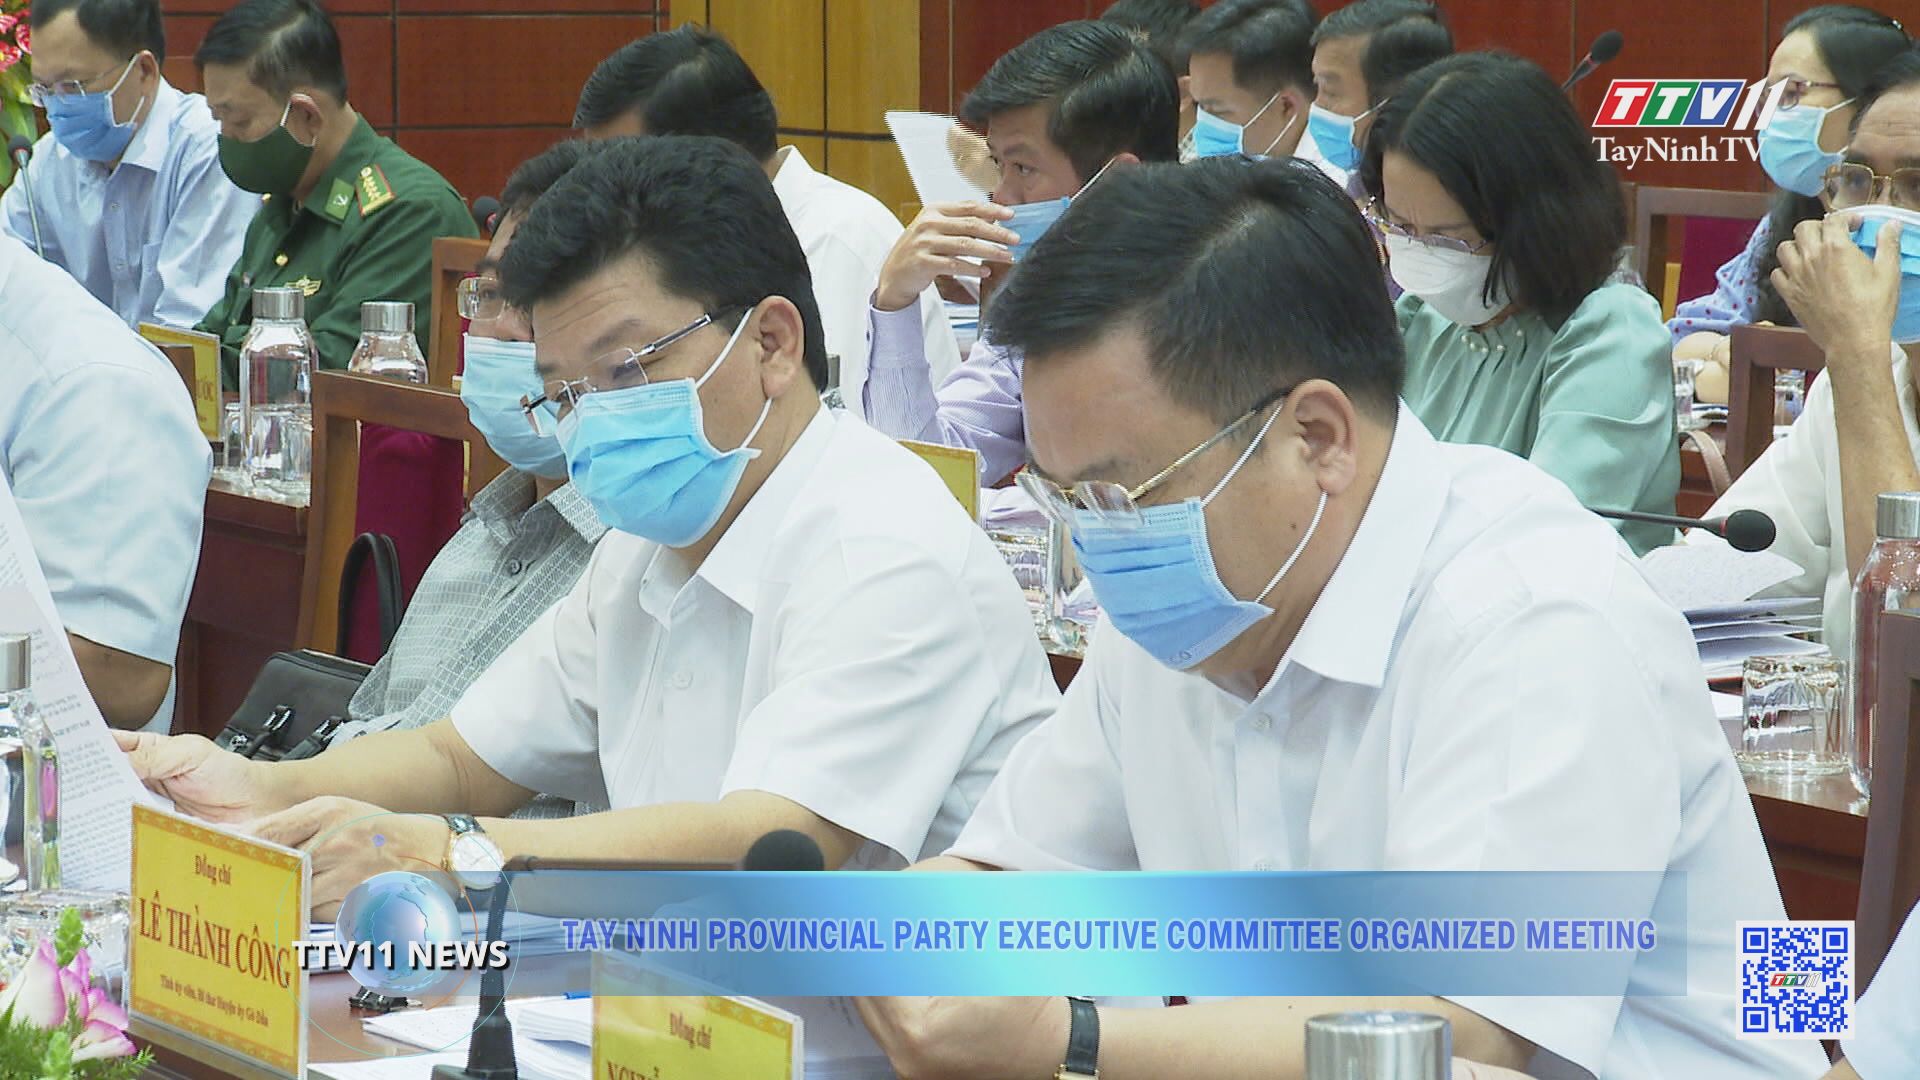 Tay Ninh Provincial Party Executive Committee Meeting | TTVNEWS | TayNinhTV Today 